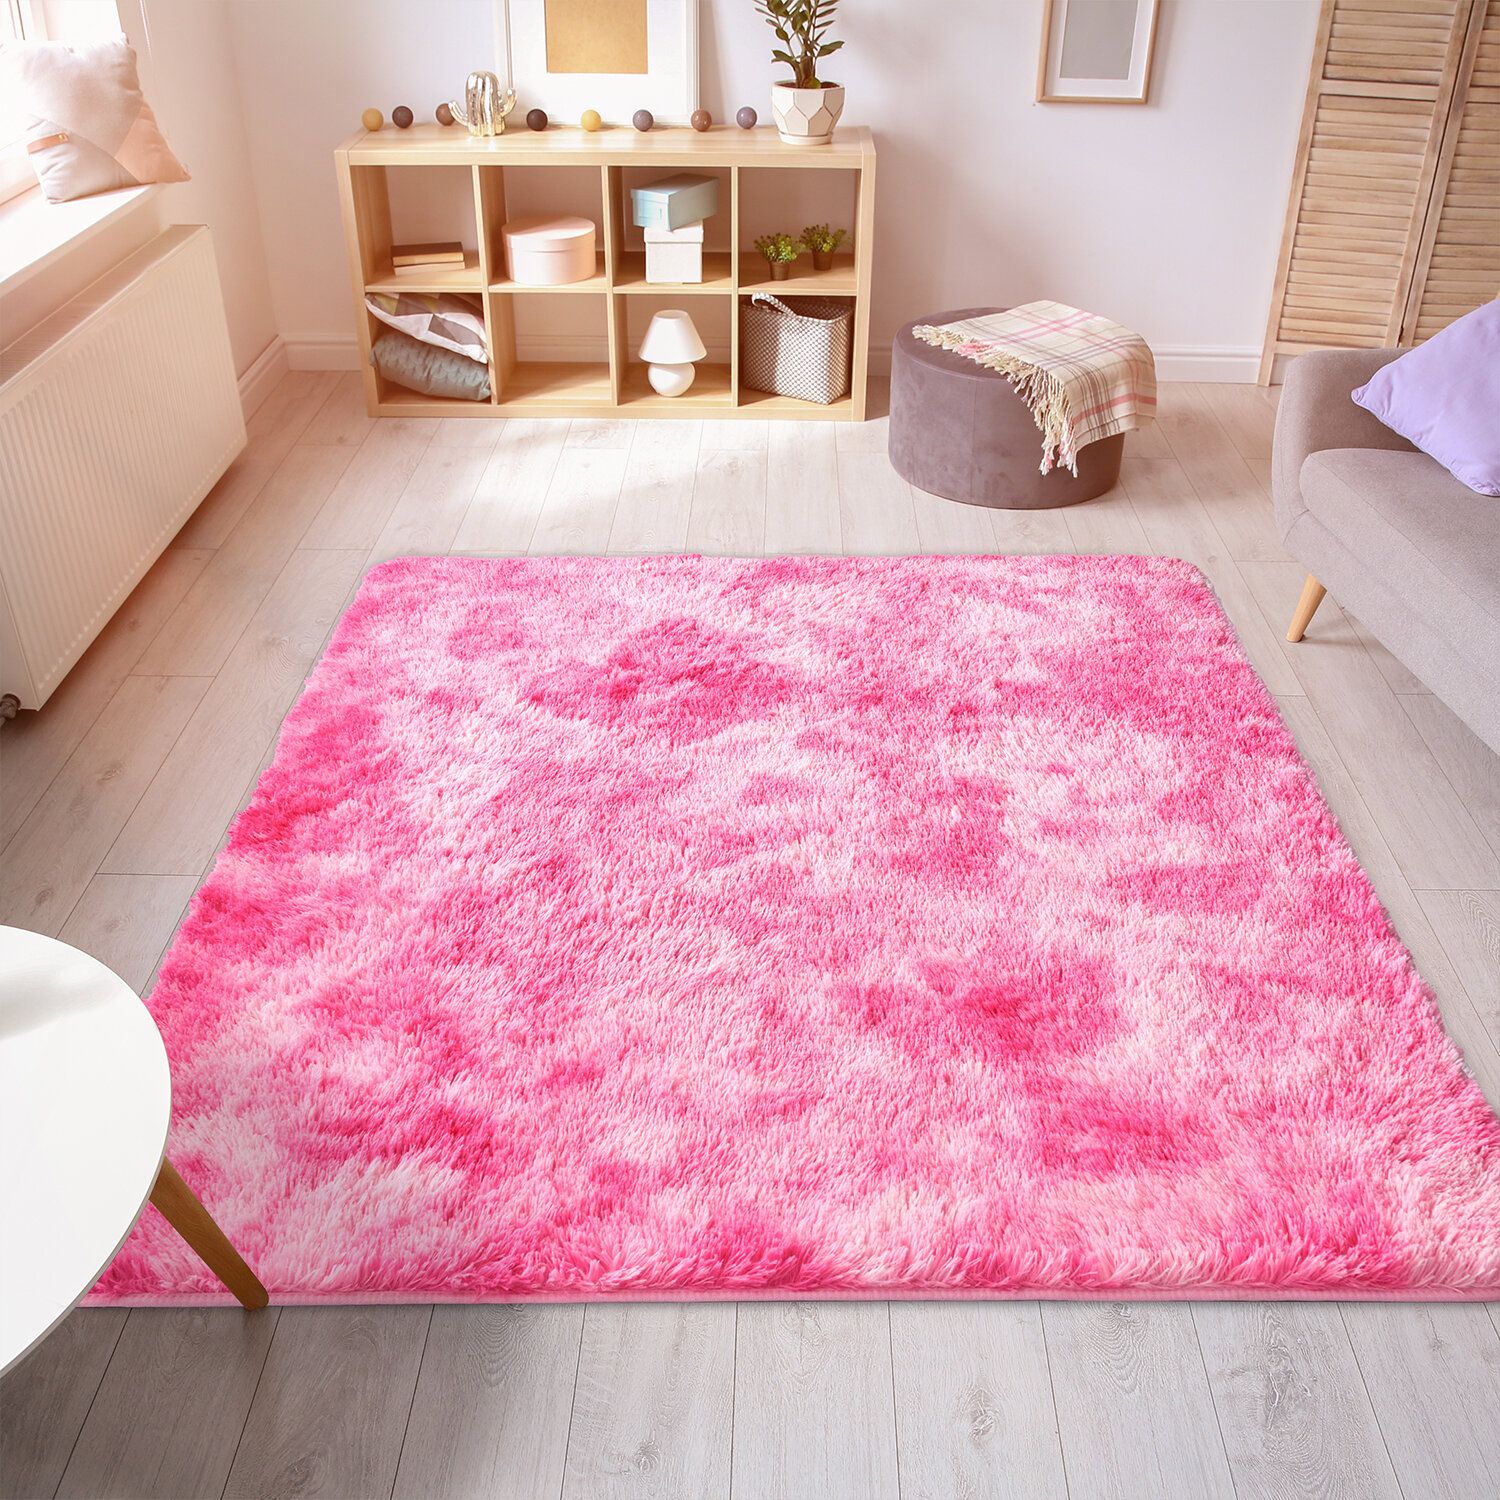 Mercer41 Belgard Machine Tufted Performance Pink Rug & Reviews | Wayfair Pertaining To Pink Soft Touch Shag Rugs (View 5 of 15)